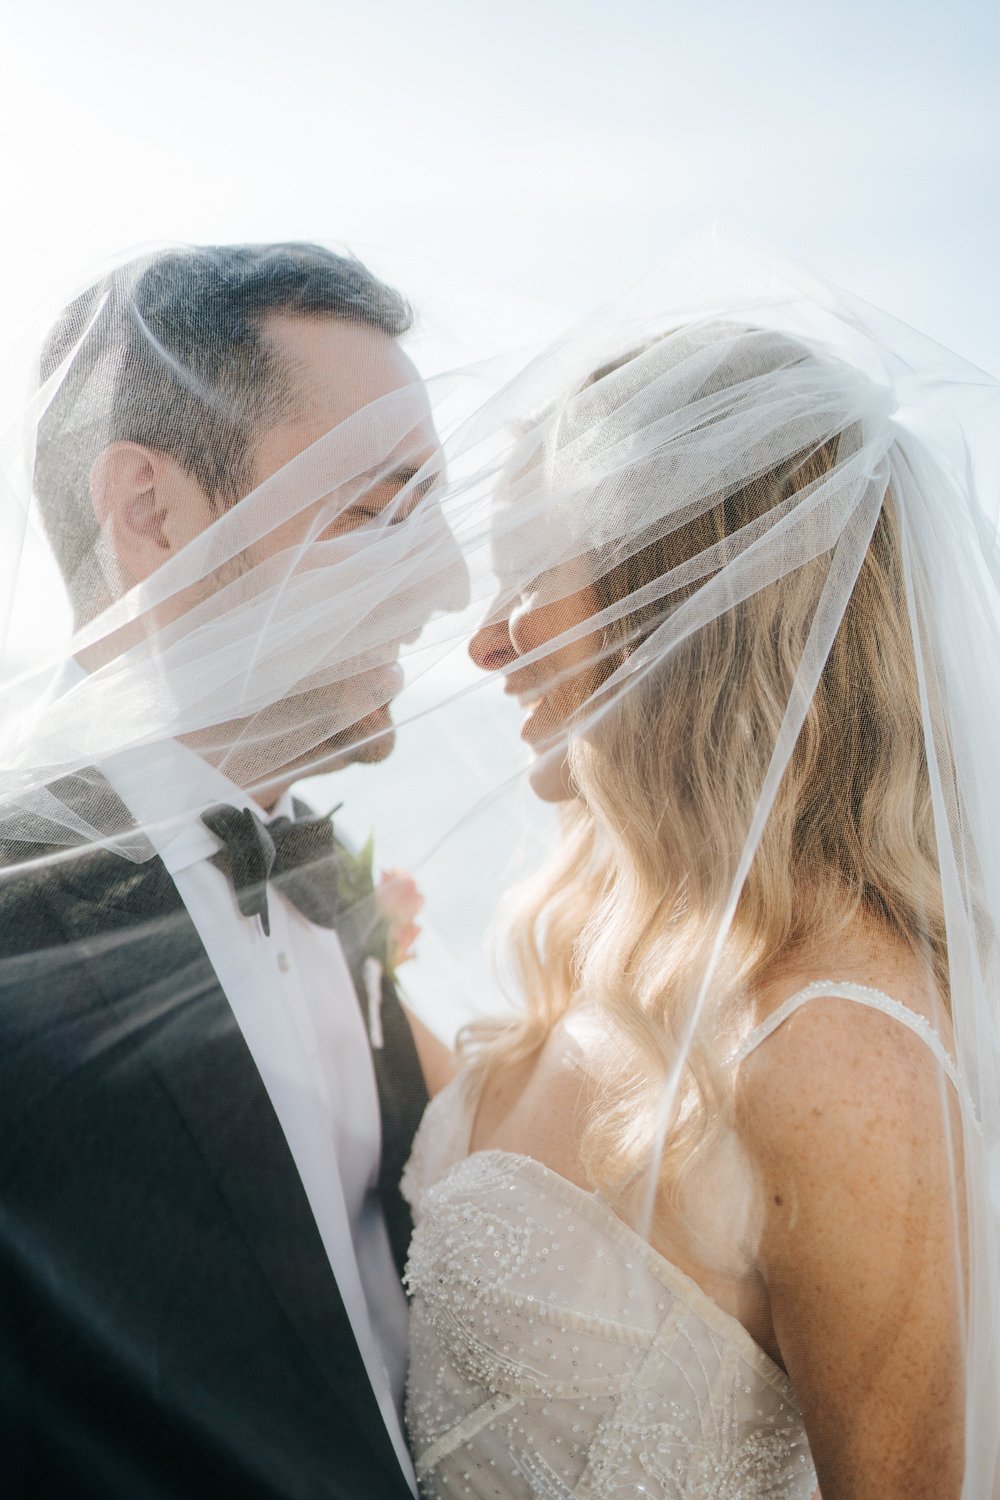 Bride and groom, draped in veil, smile in romantic capture at Puerto Rico beachfront wedding